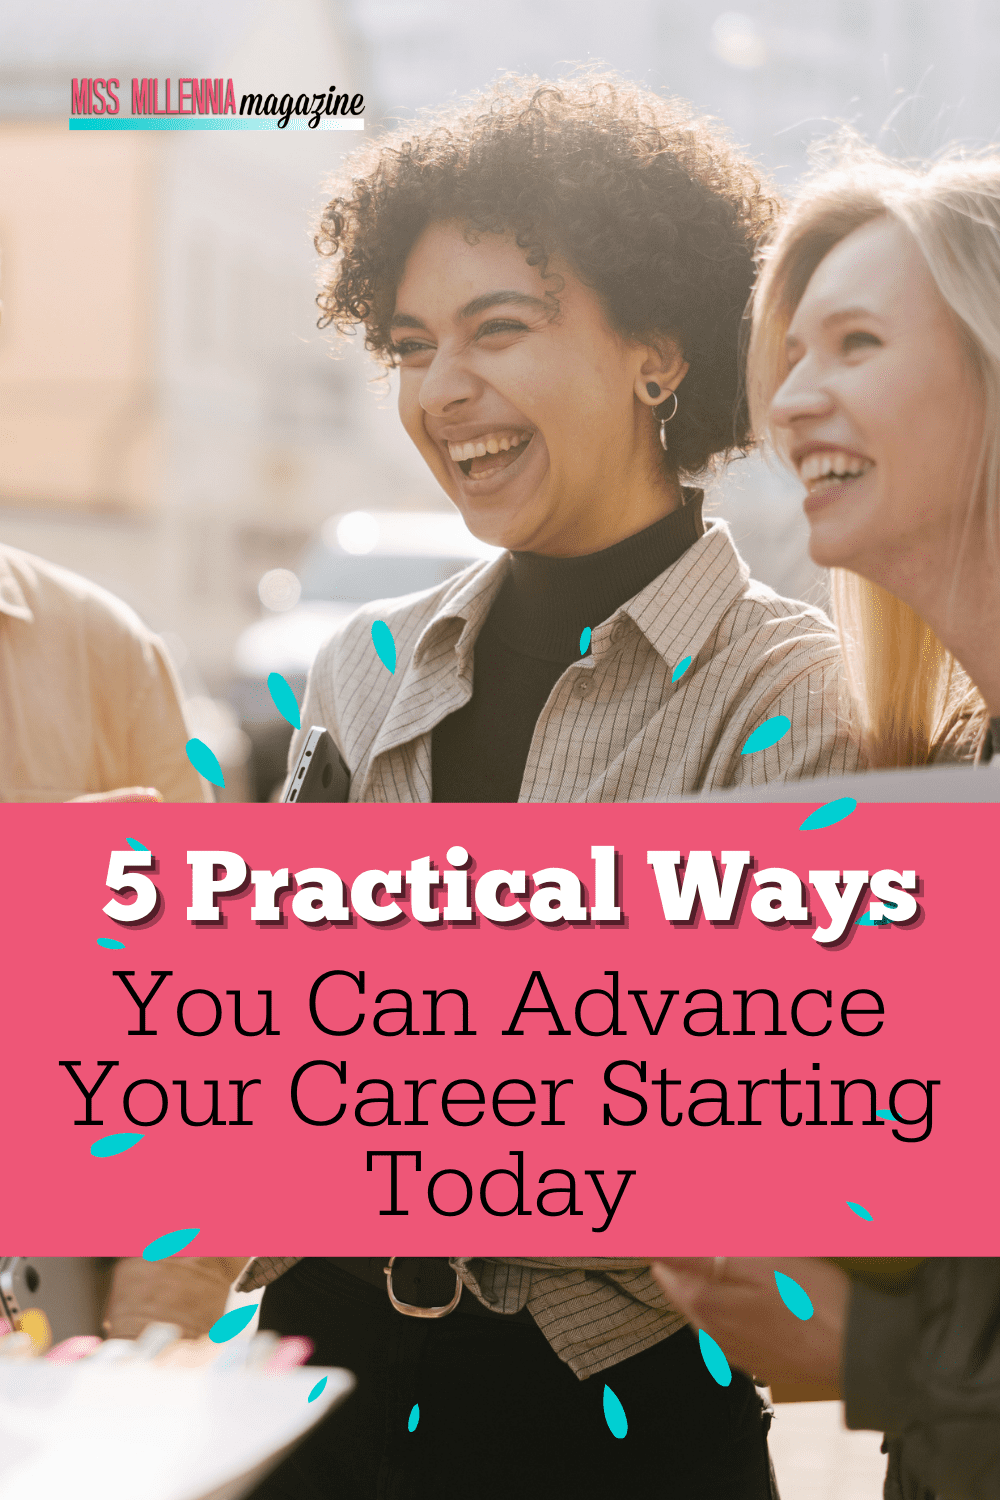 5 Practical Ways You Can Advance Your Career Starting Today